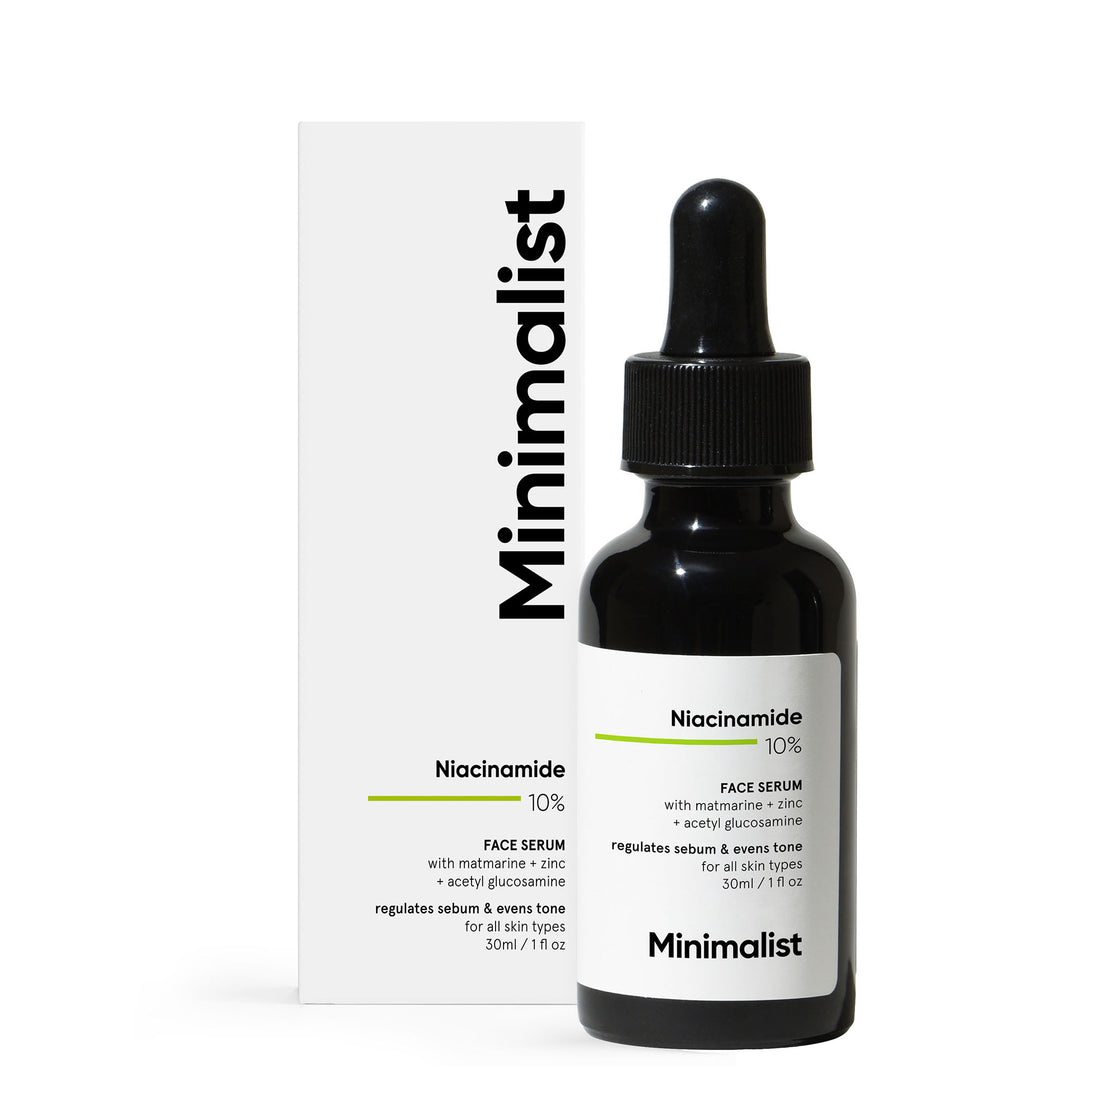 Minimalist 10Percentage Niacinamide Face Serum With Euk-134 For Reducing Oil & Blemishes (30Ml)